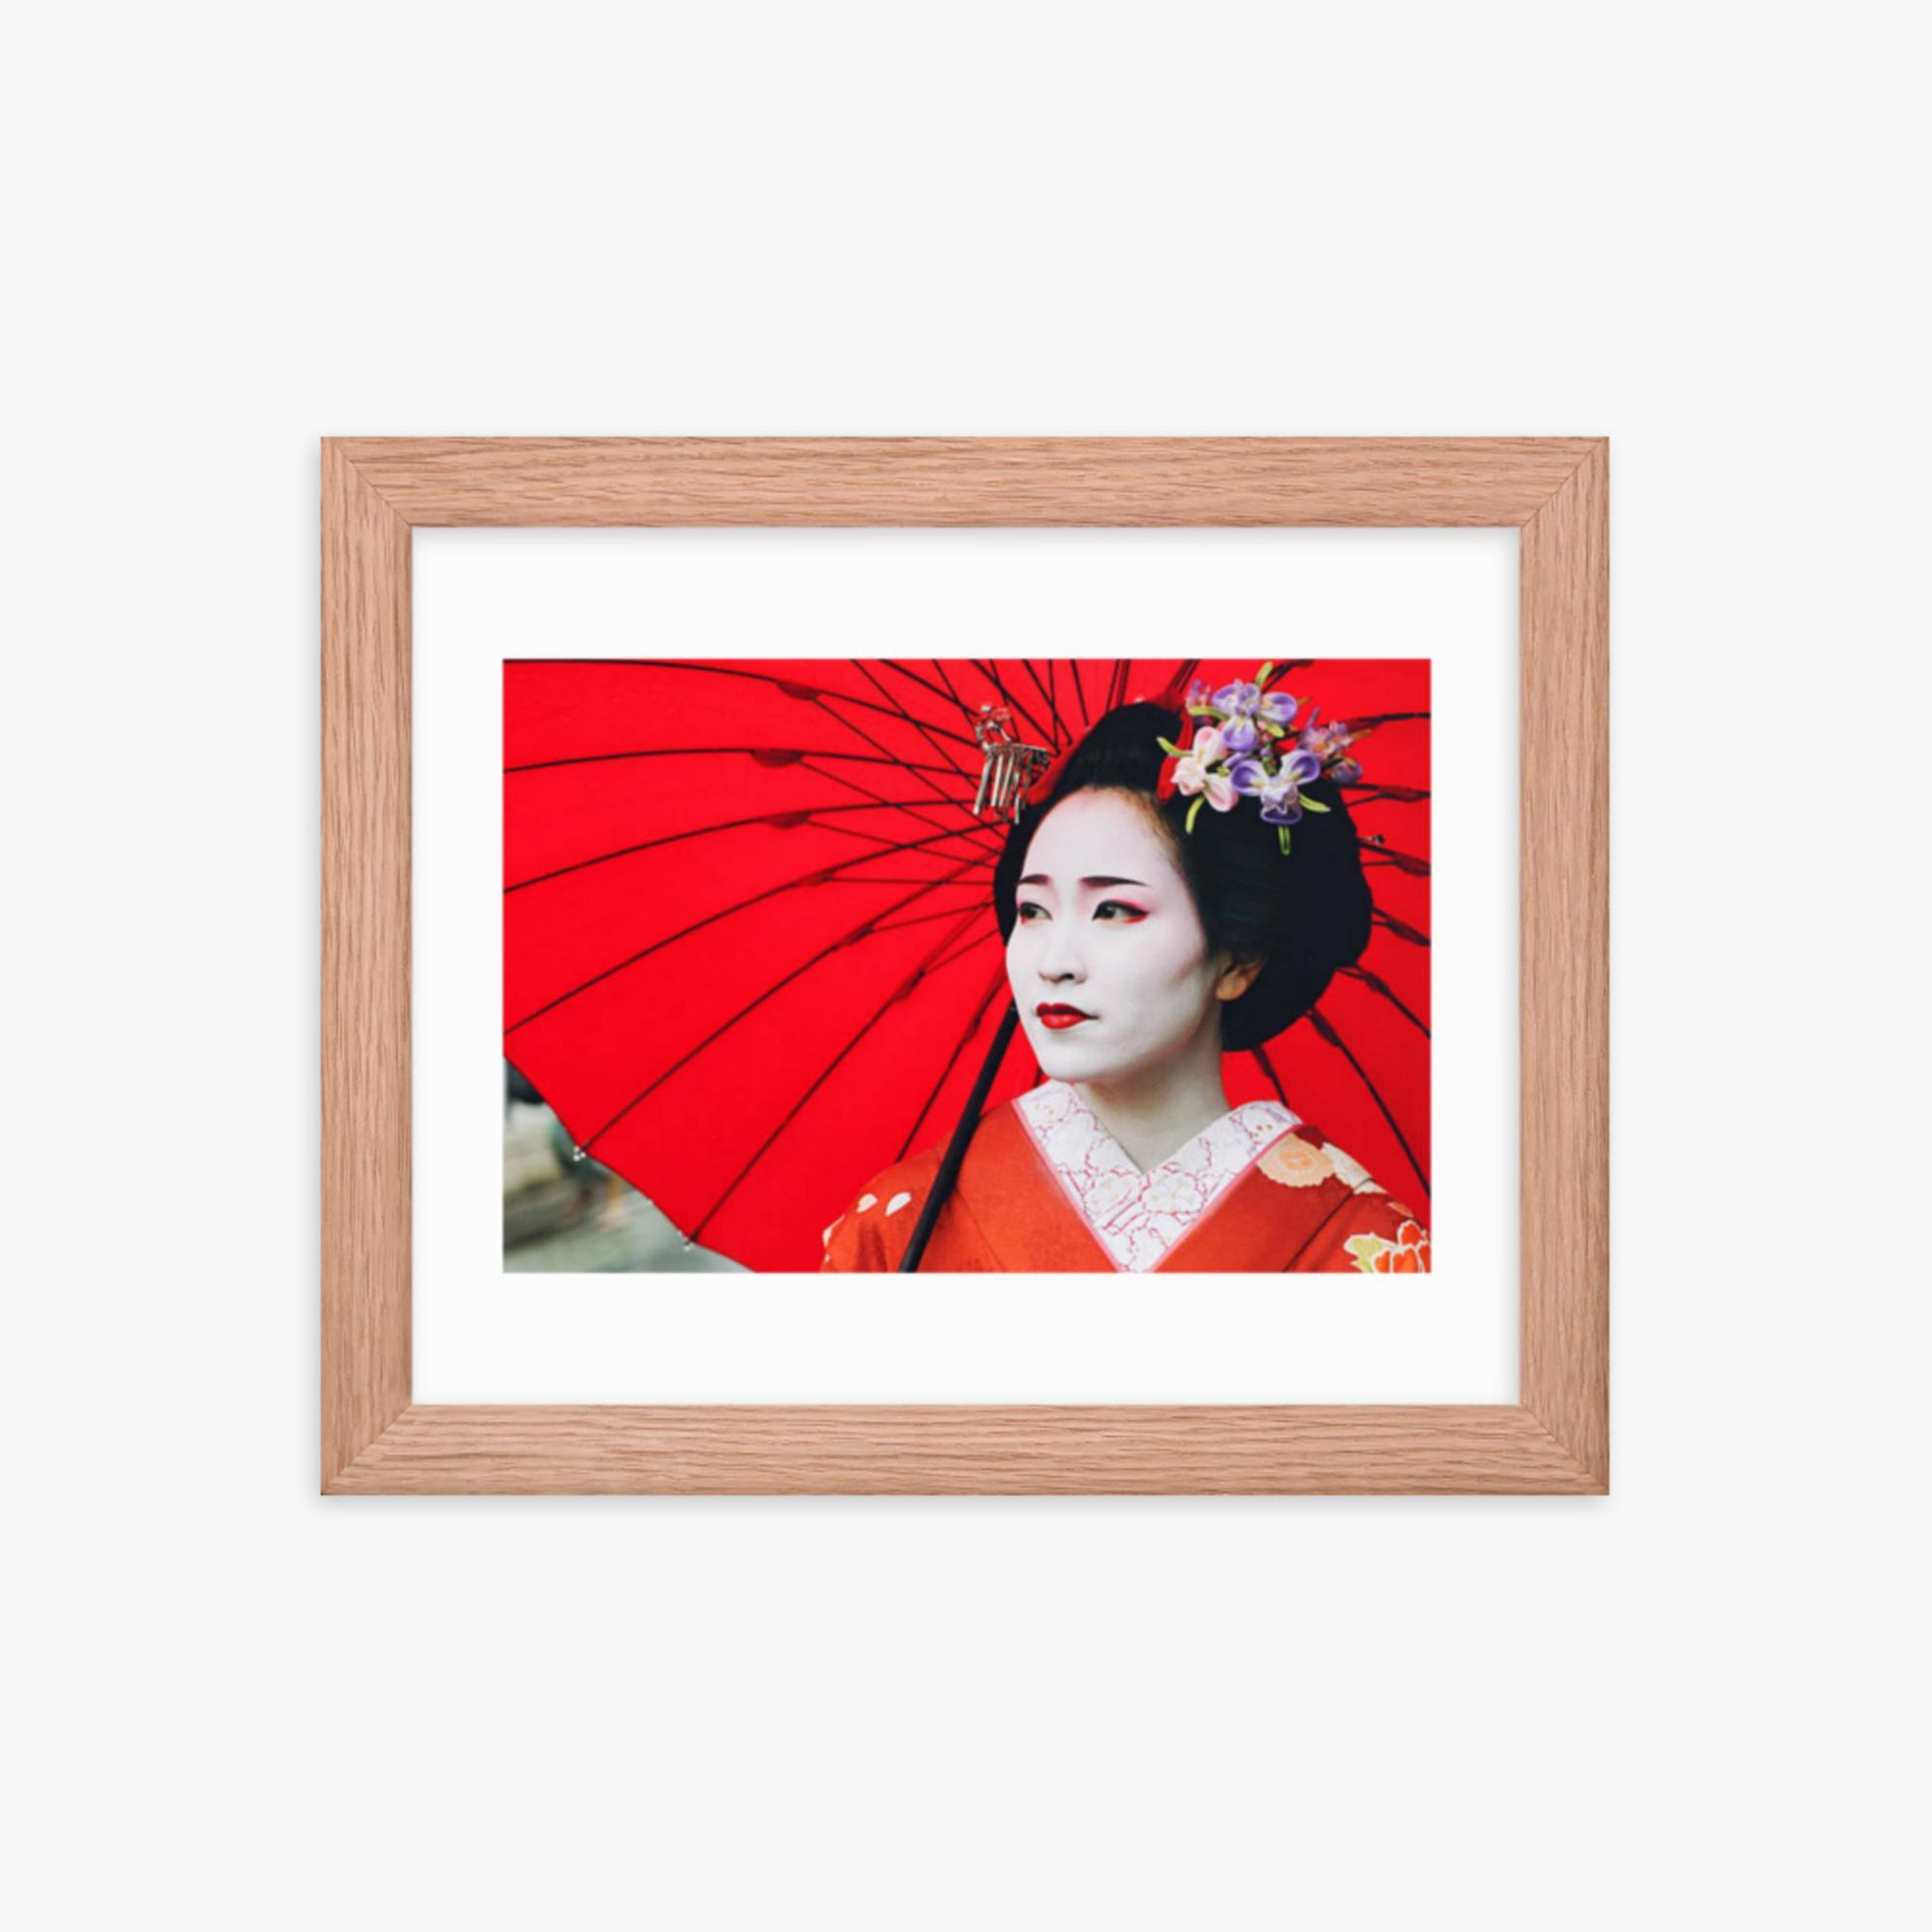 Maiko Girl Portrait 8x10 in Poster With Oak Frame